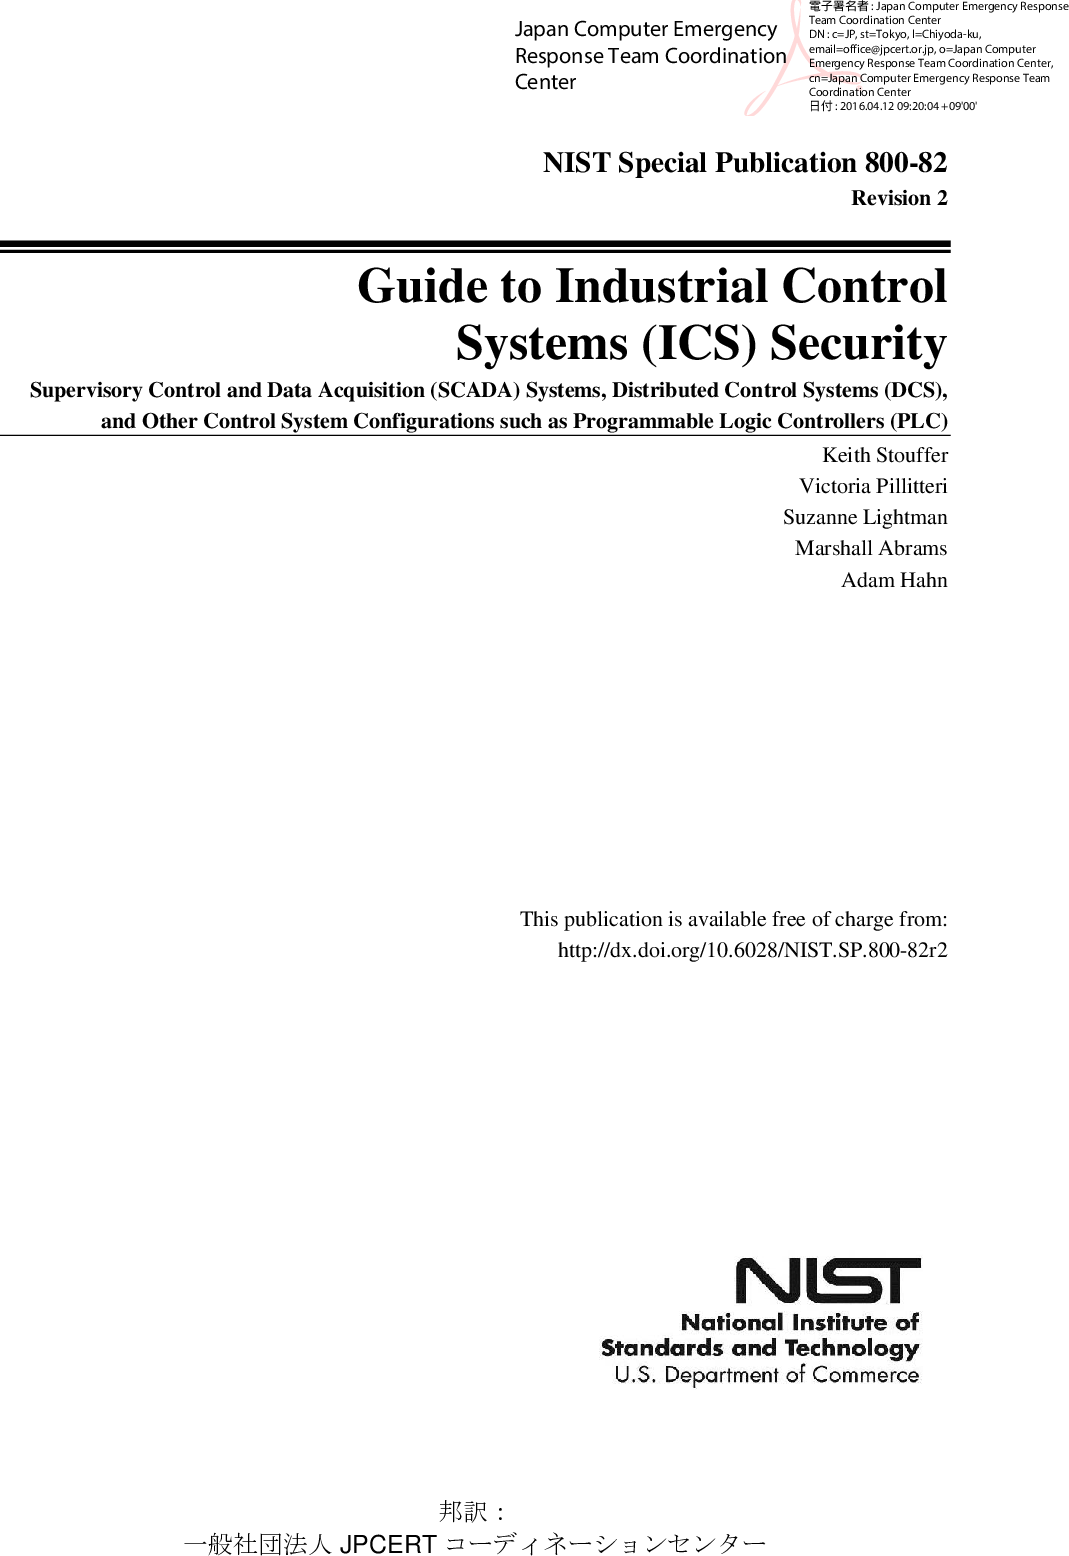 Guide To Industrial Control System Ics Security Systems Security Nist Sp 800 82r2 Jpcert和